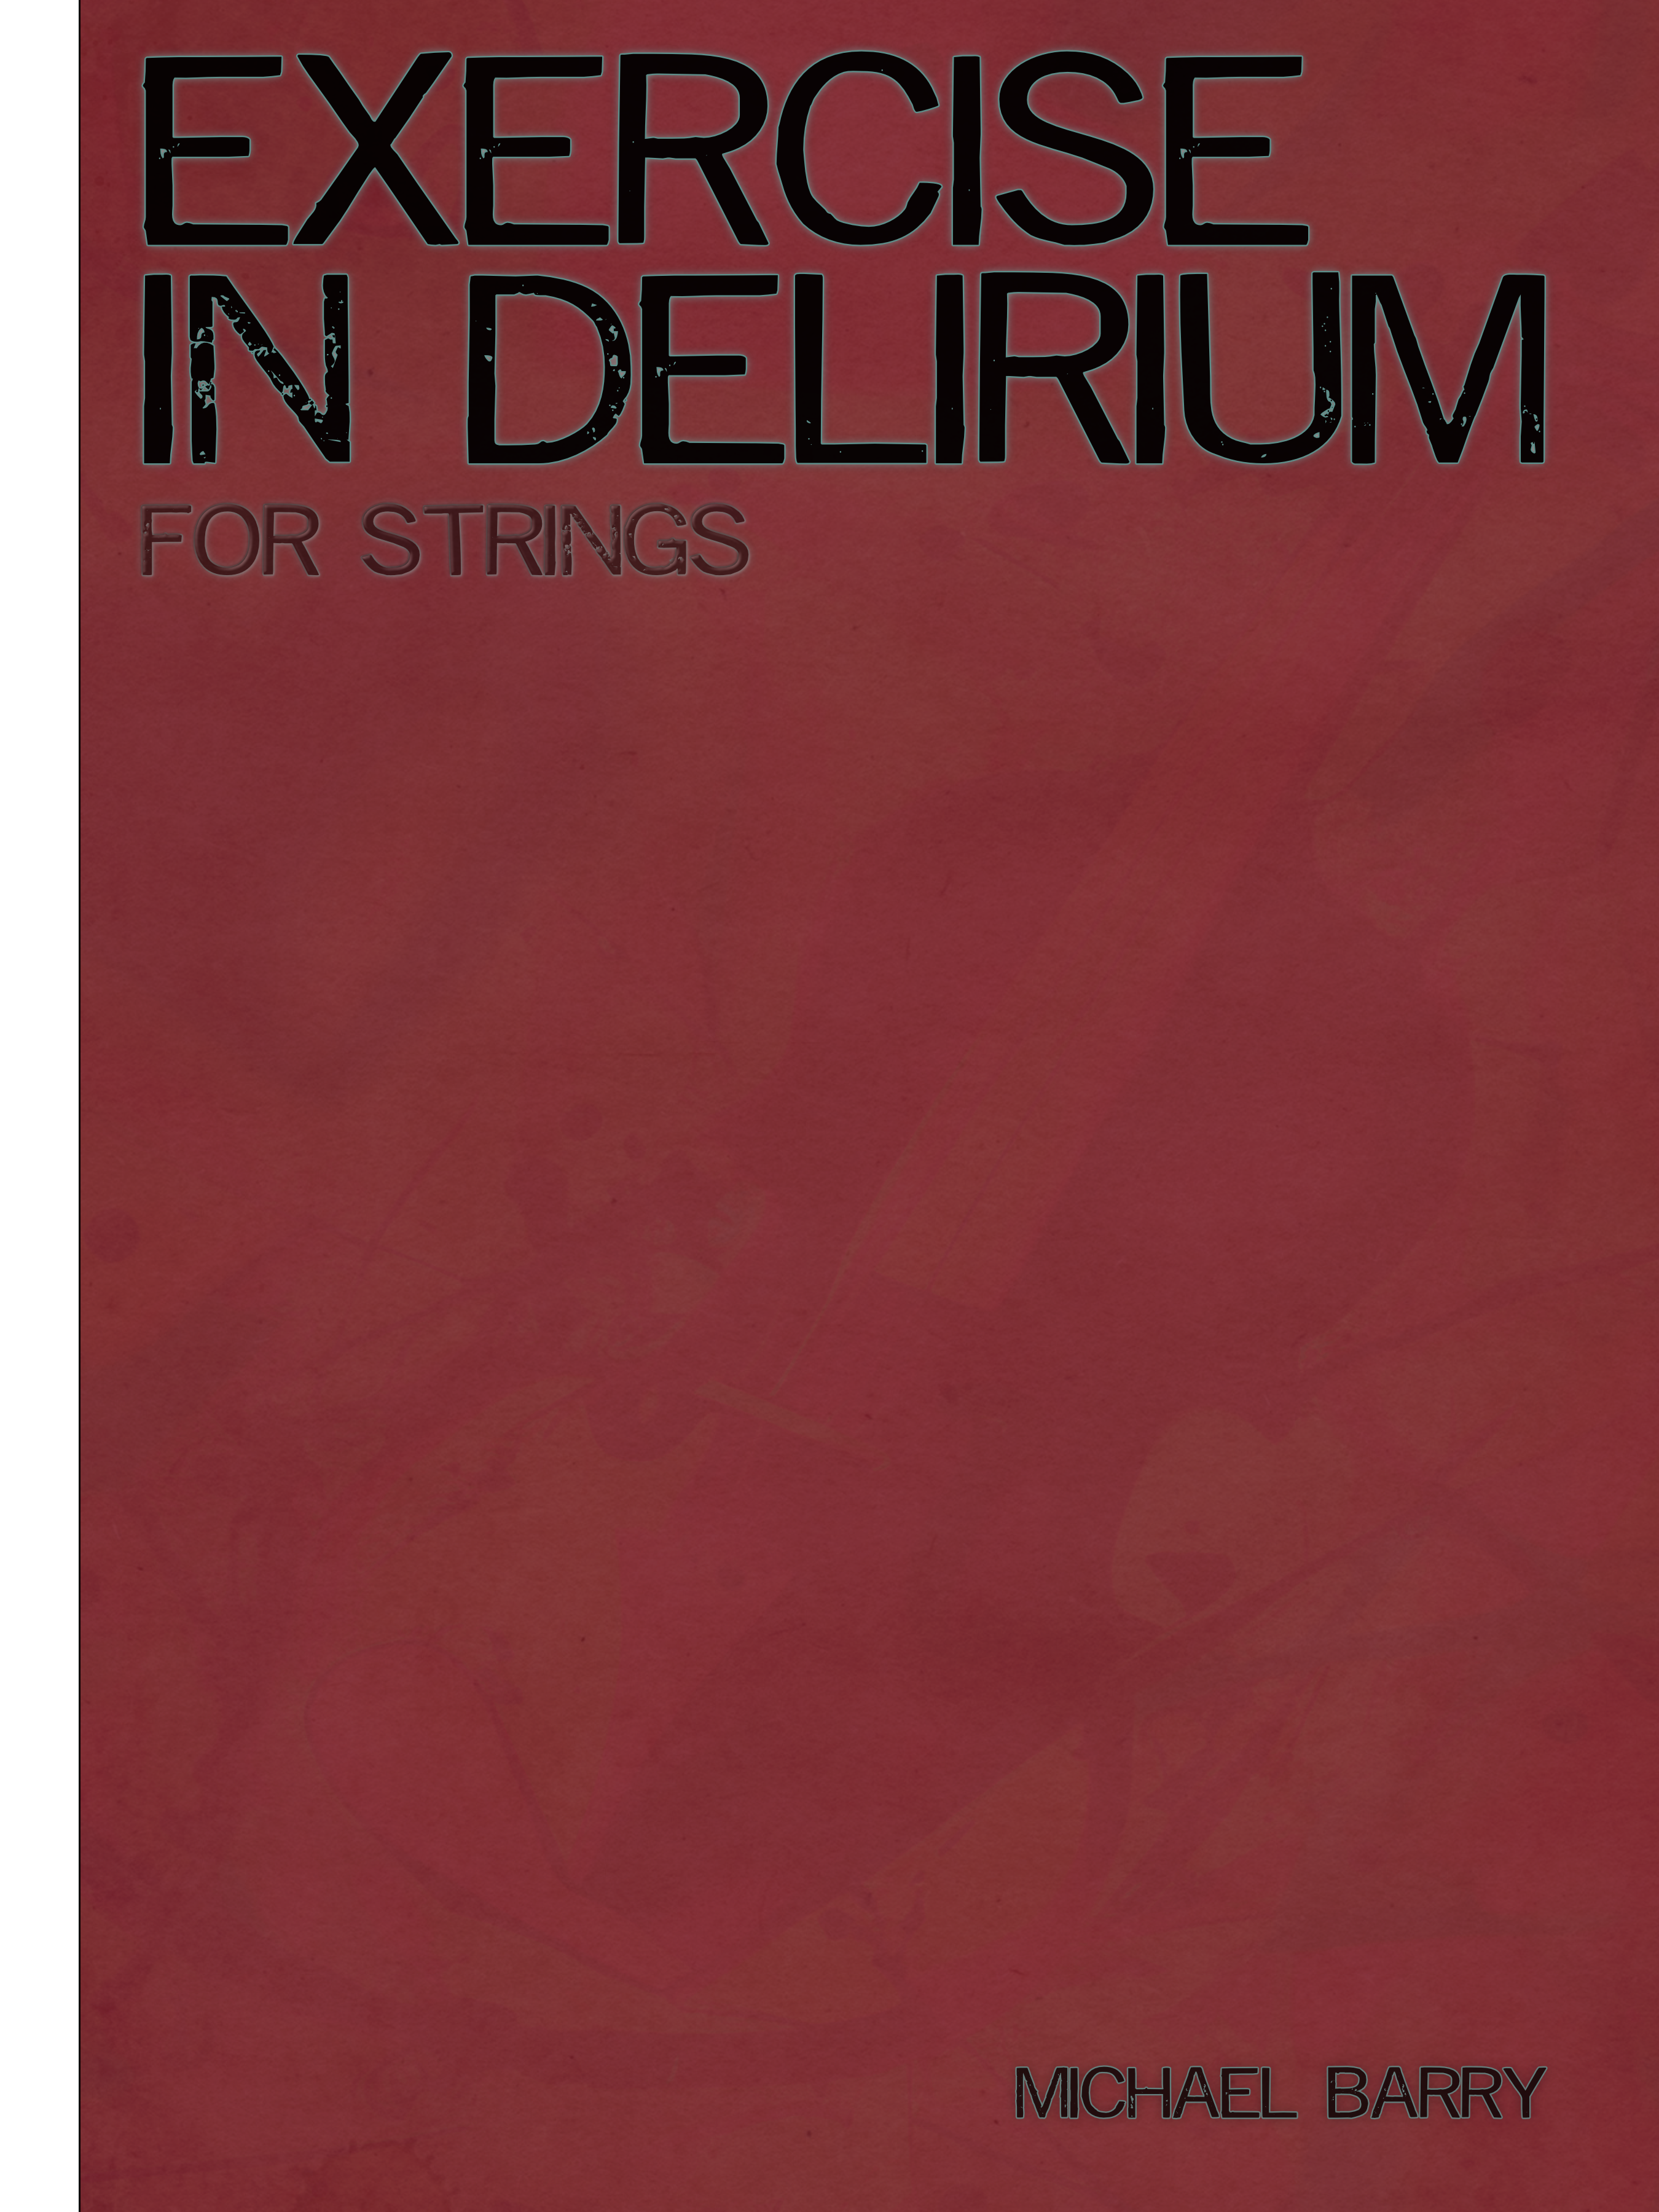 Exercise In Delirium by Michael Barry